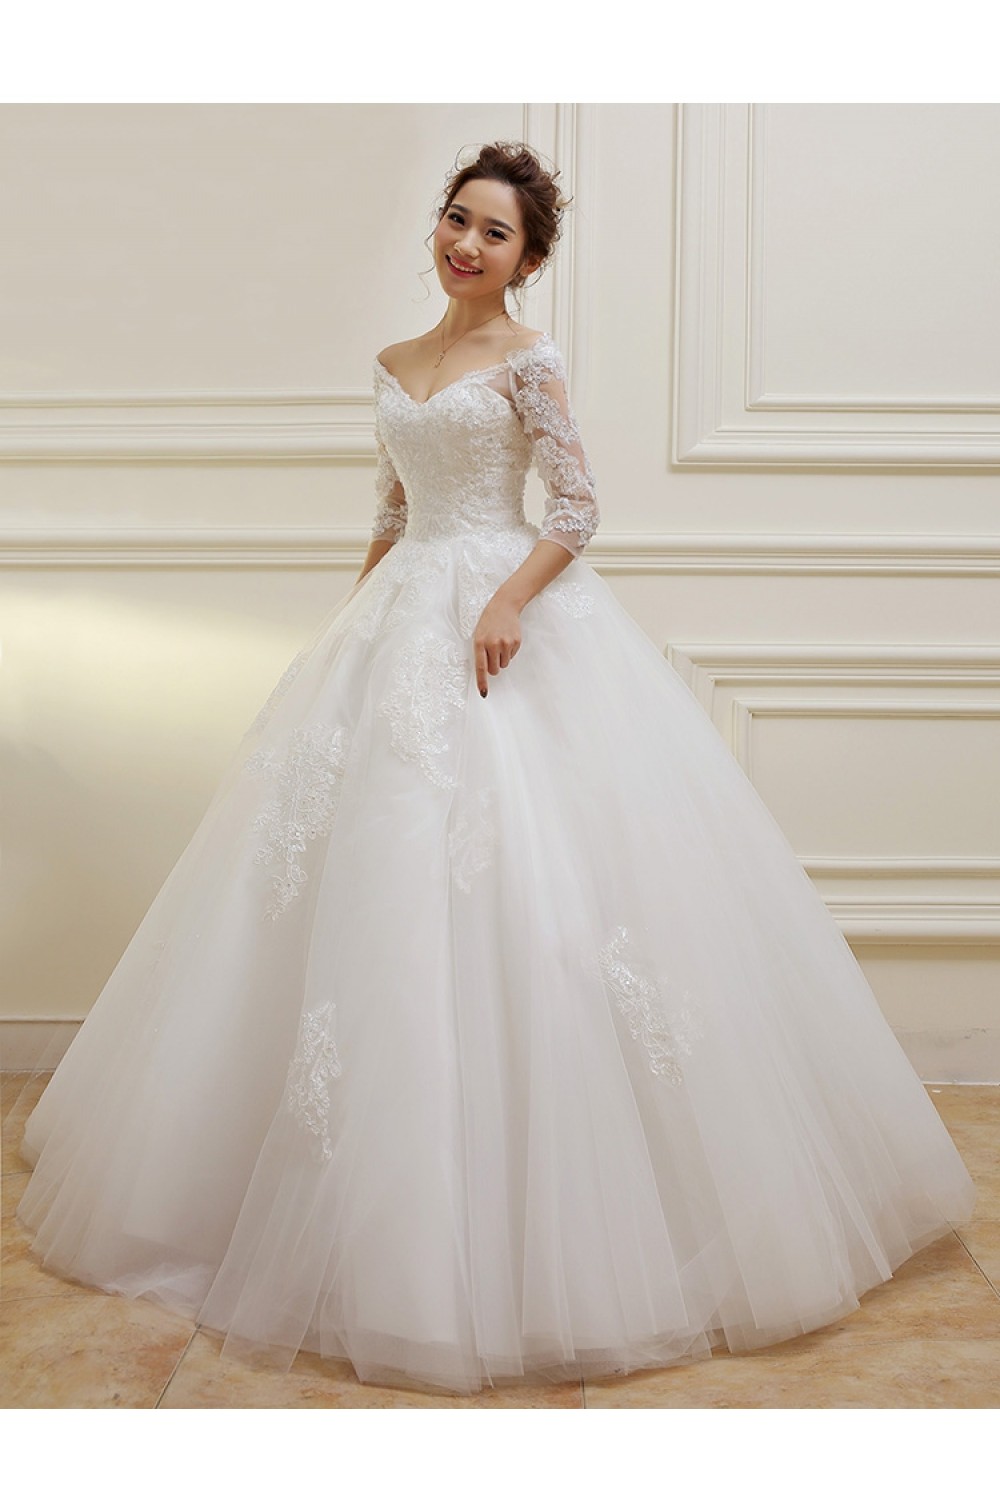 Top Wedding Dress Lace With Sleeves The ultimate guide | usastylewedding4